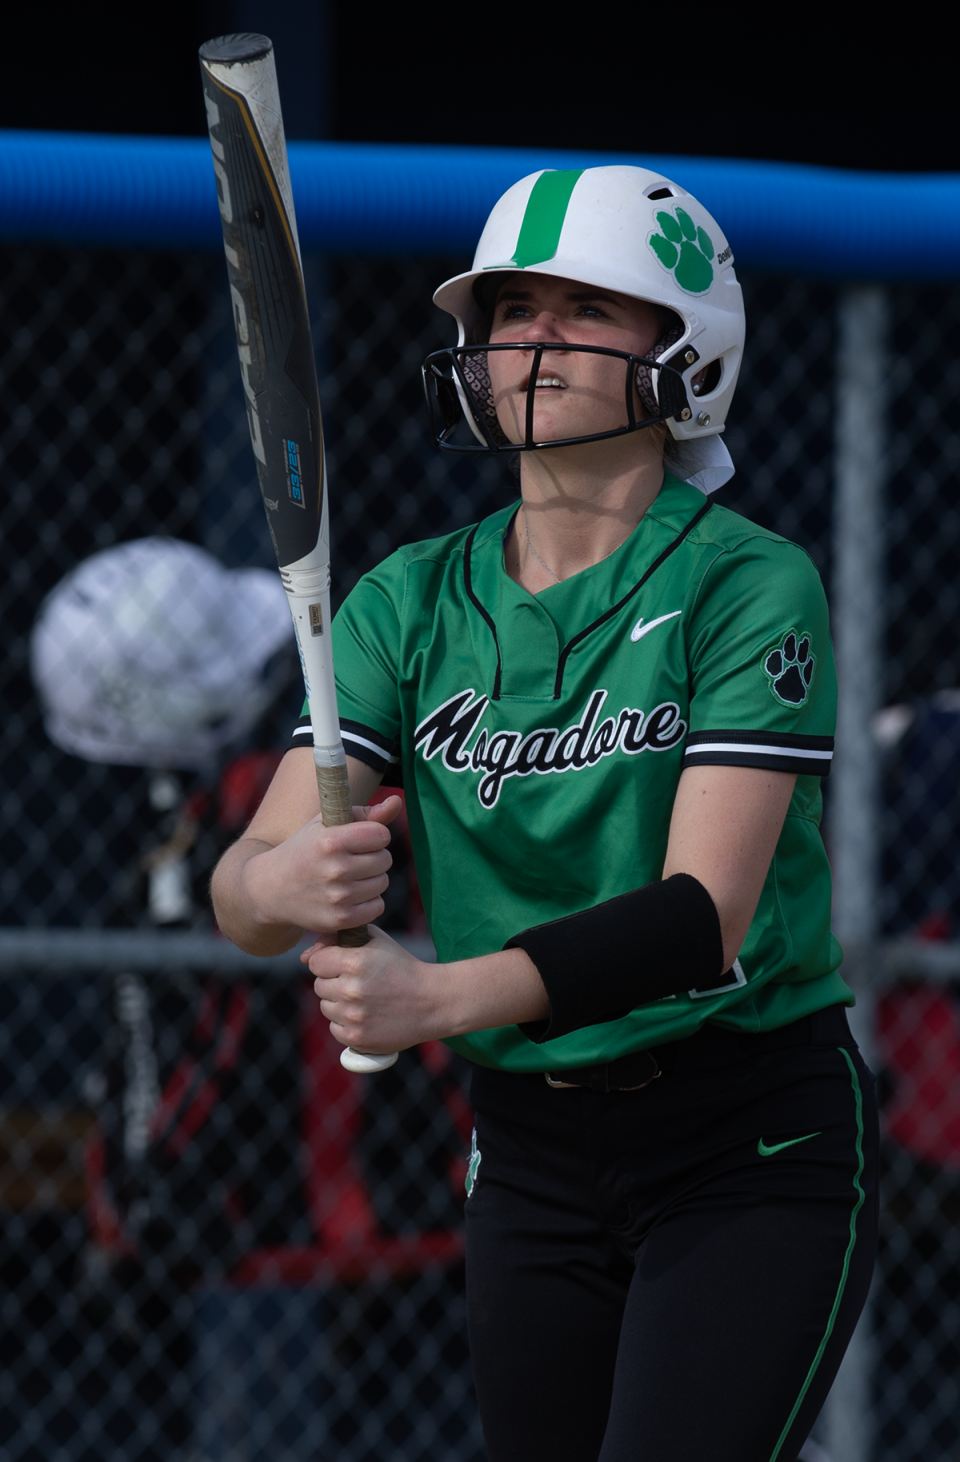 Katie Gardner steps into the batter's box. Rootstown hosted Mogadore for softball on Tuesday, April 11.